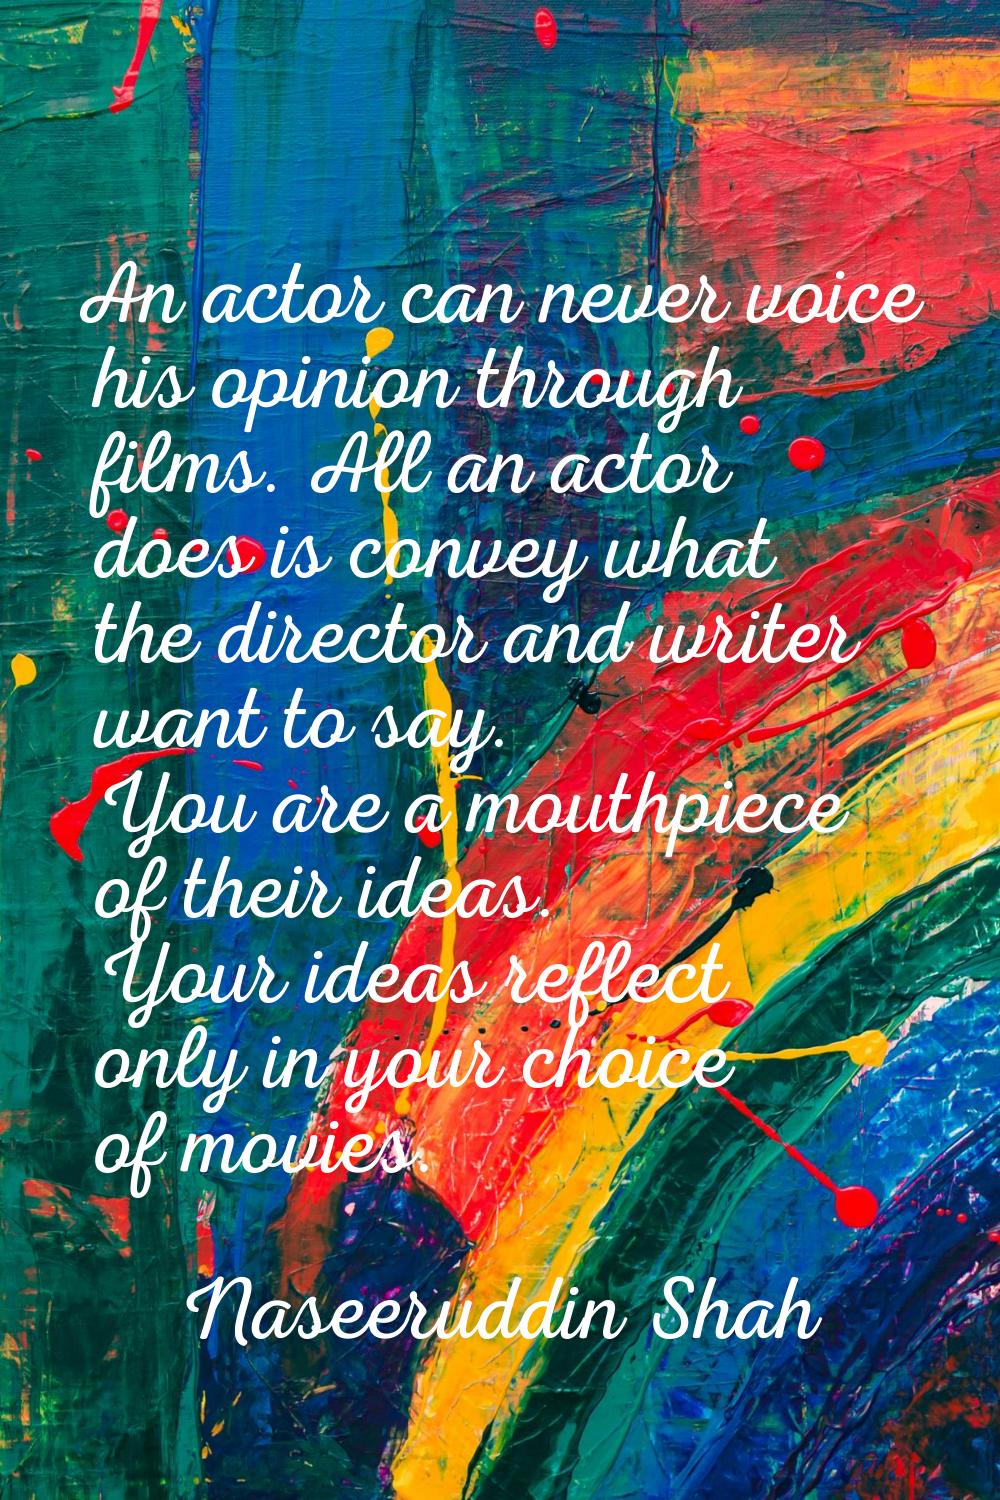 An actor can never voice his opinion through films. All an actor does is convey what the director a